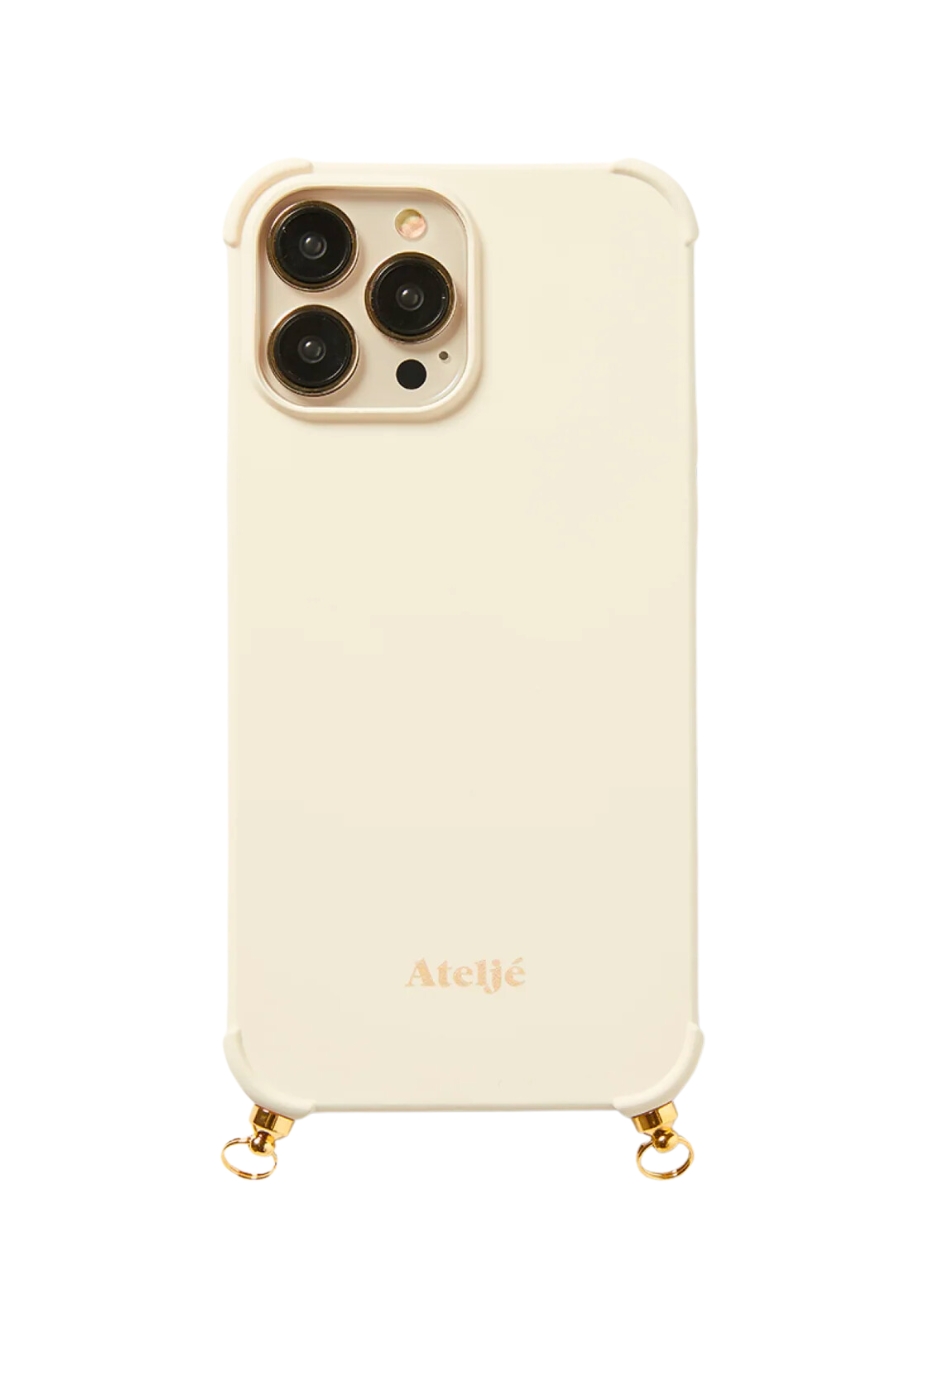 atelje-beige-recycled-phone-case-for-iphone